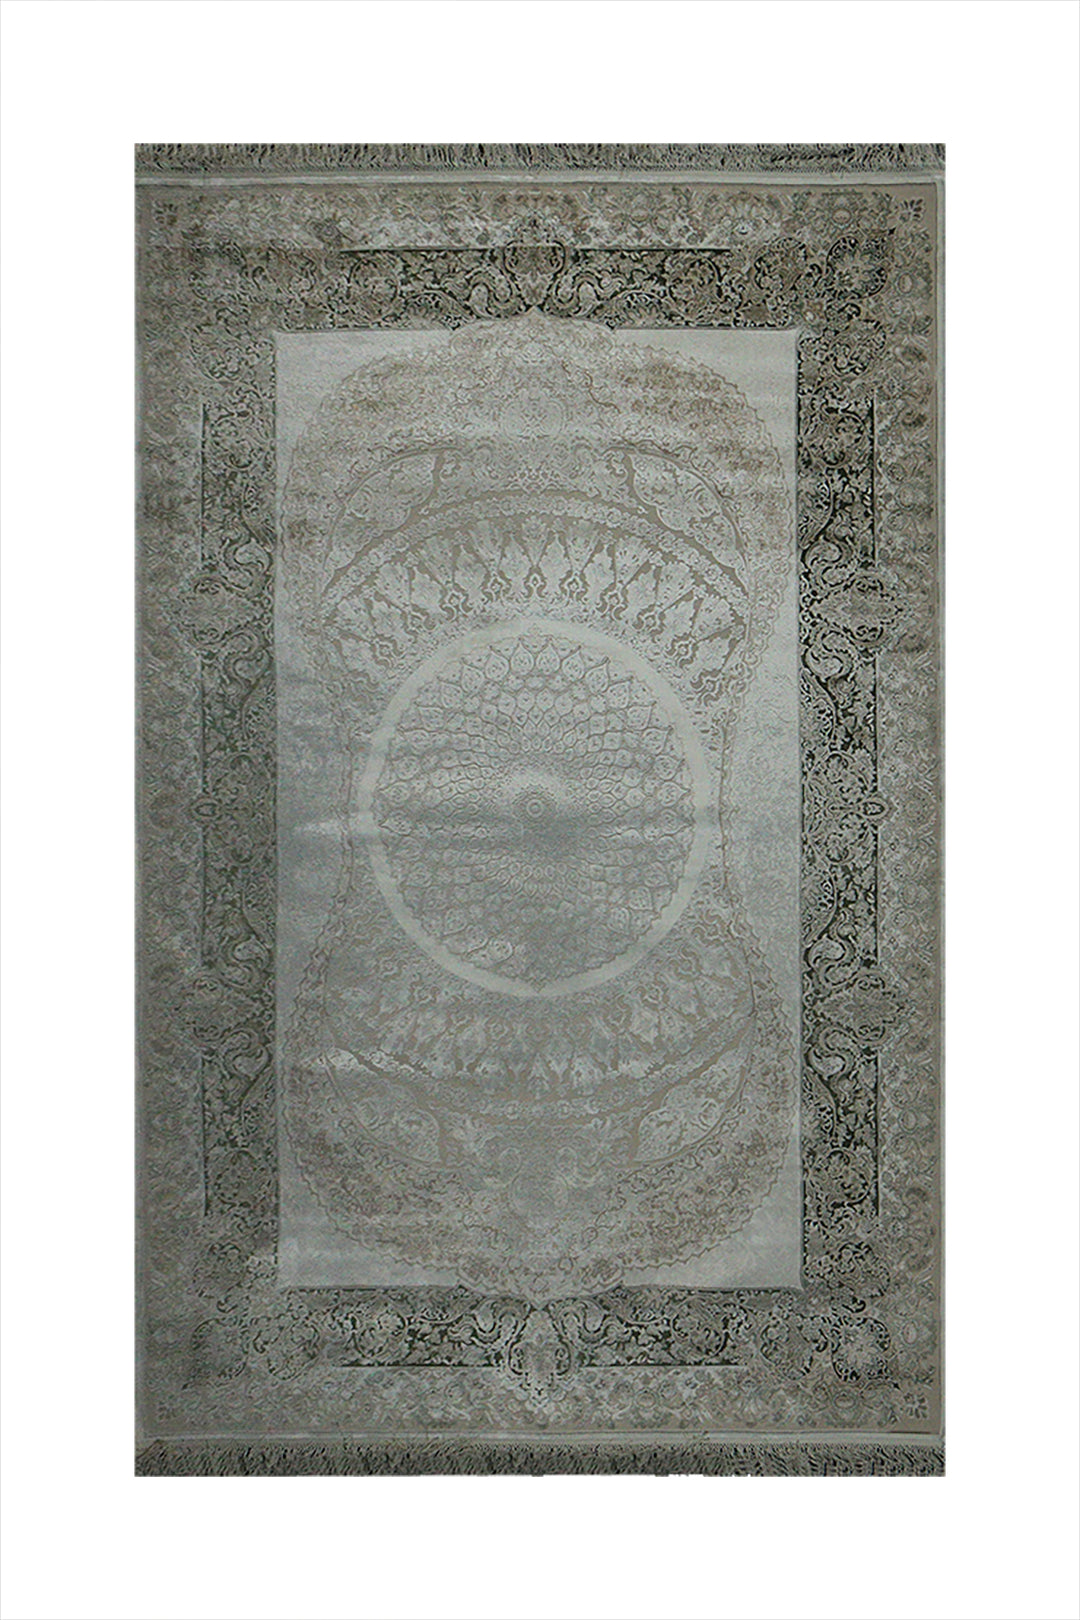 Turkish Premium Quality Voyage Rug - 5.2 x 7.5 FT - Beige - Resilient Construction for Long-Lasting Use